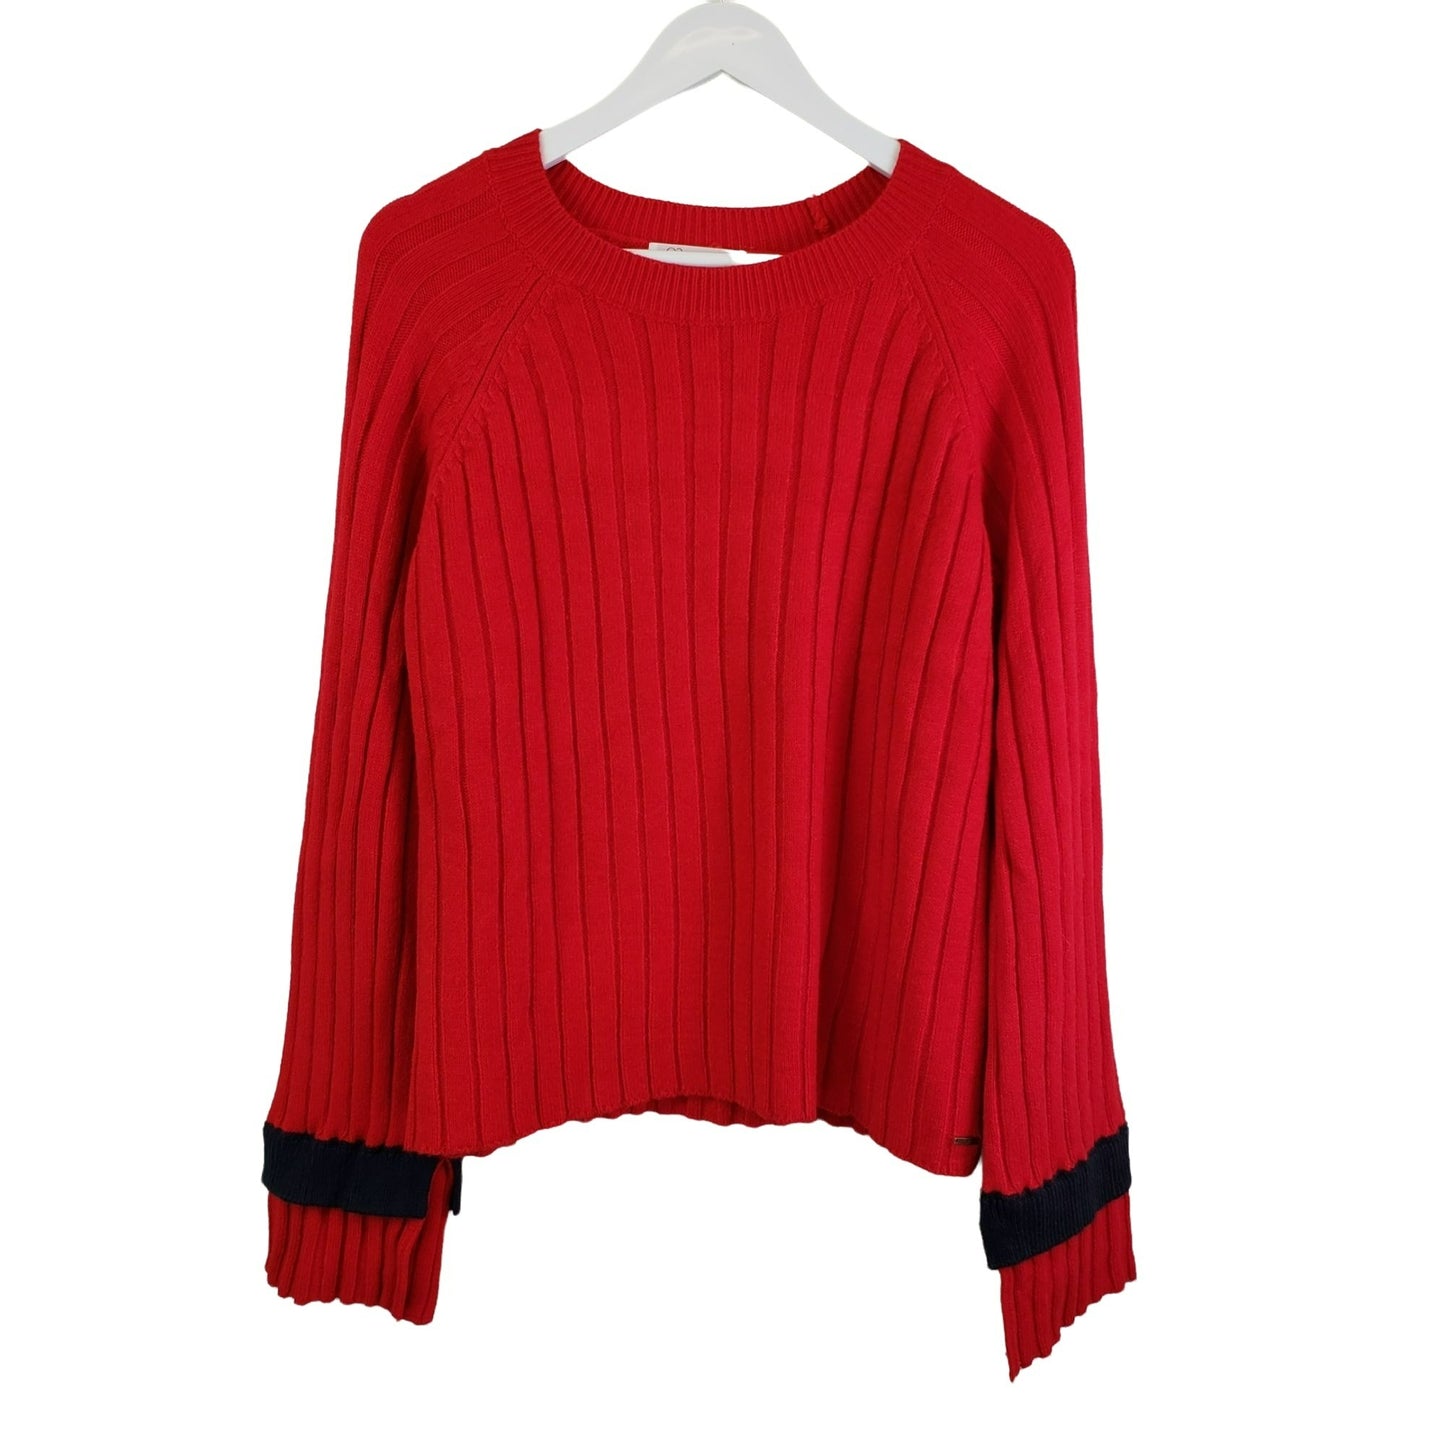 Q2 Collection Ribbed Slight Cropped Sweater with Bell Sleeves Size Medium